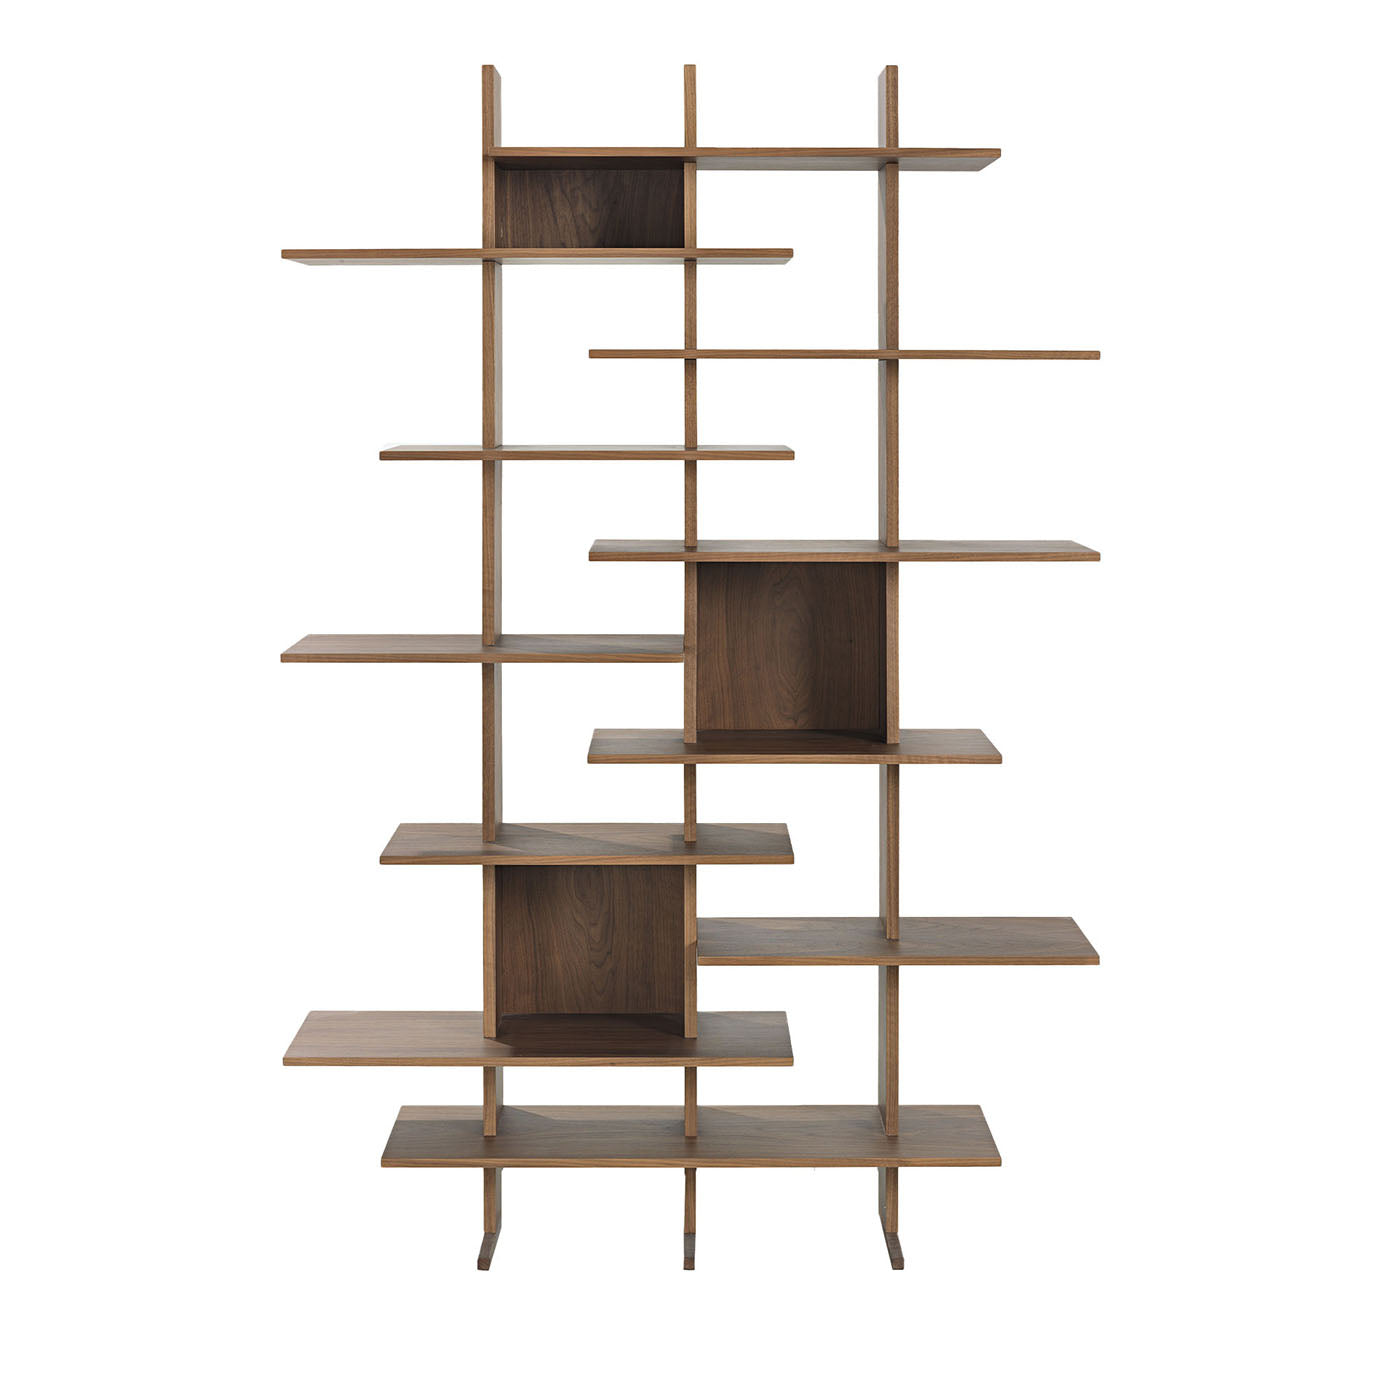 Elisabeth Bookcase #1 by Cesare Arosio and Beatrice Fanchini - Main view